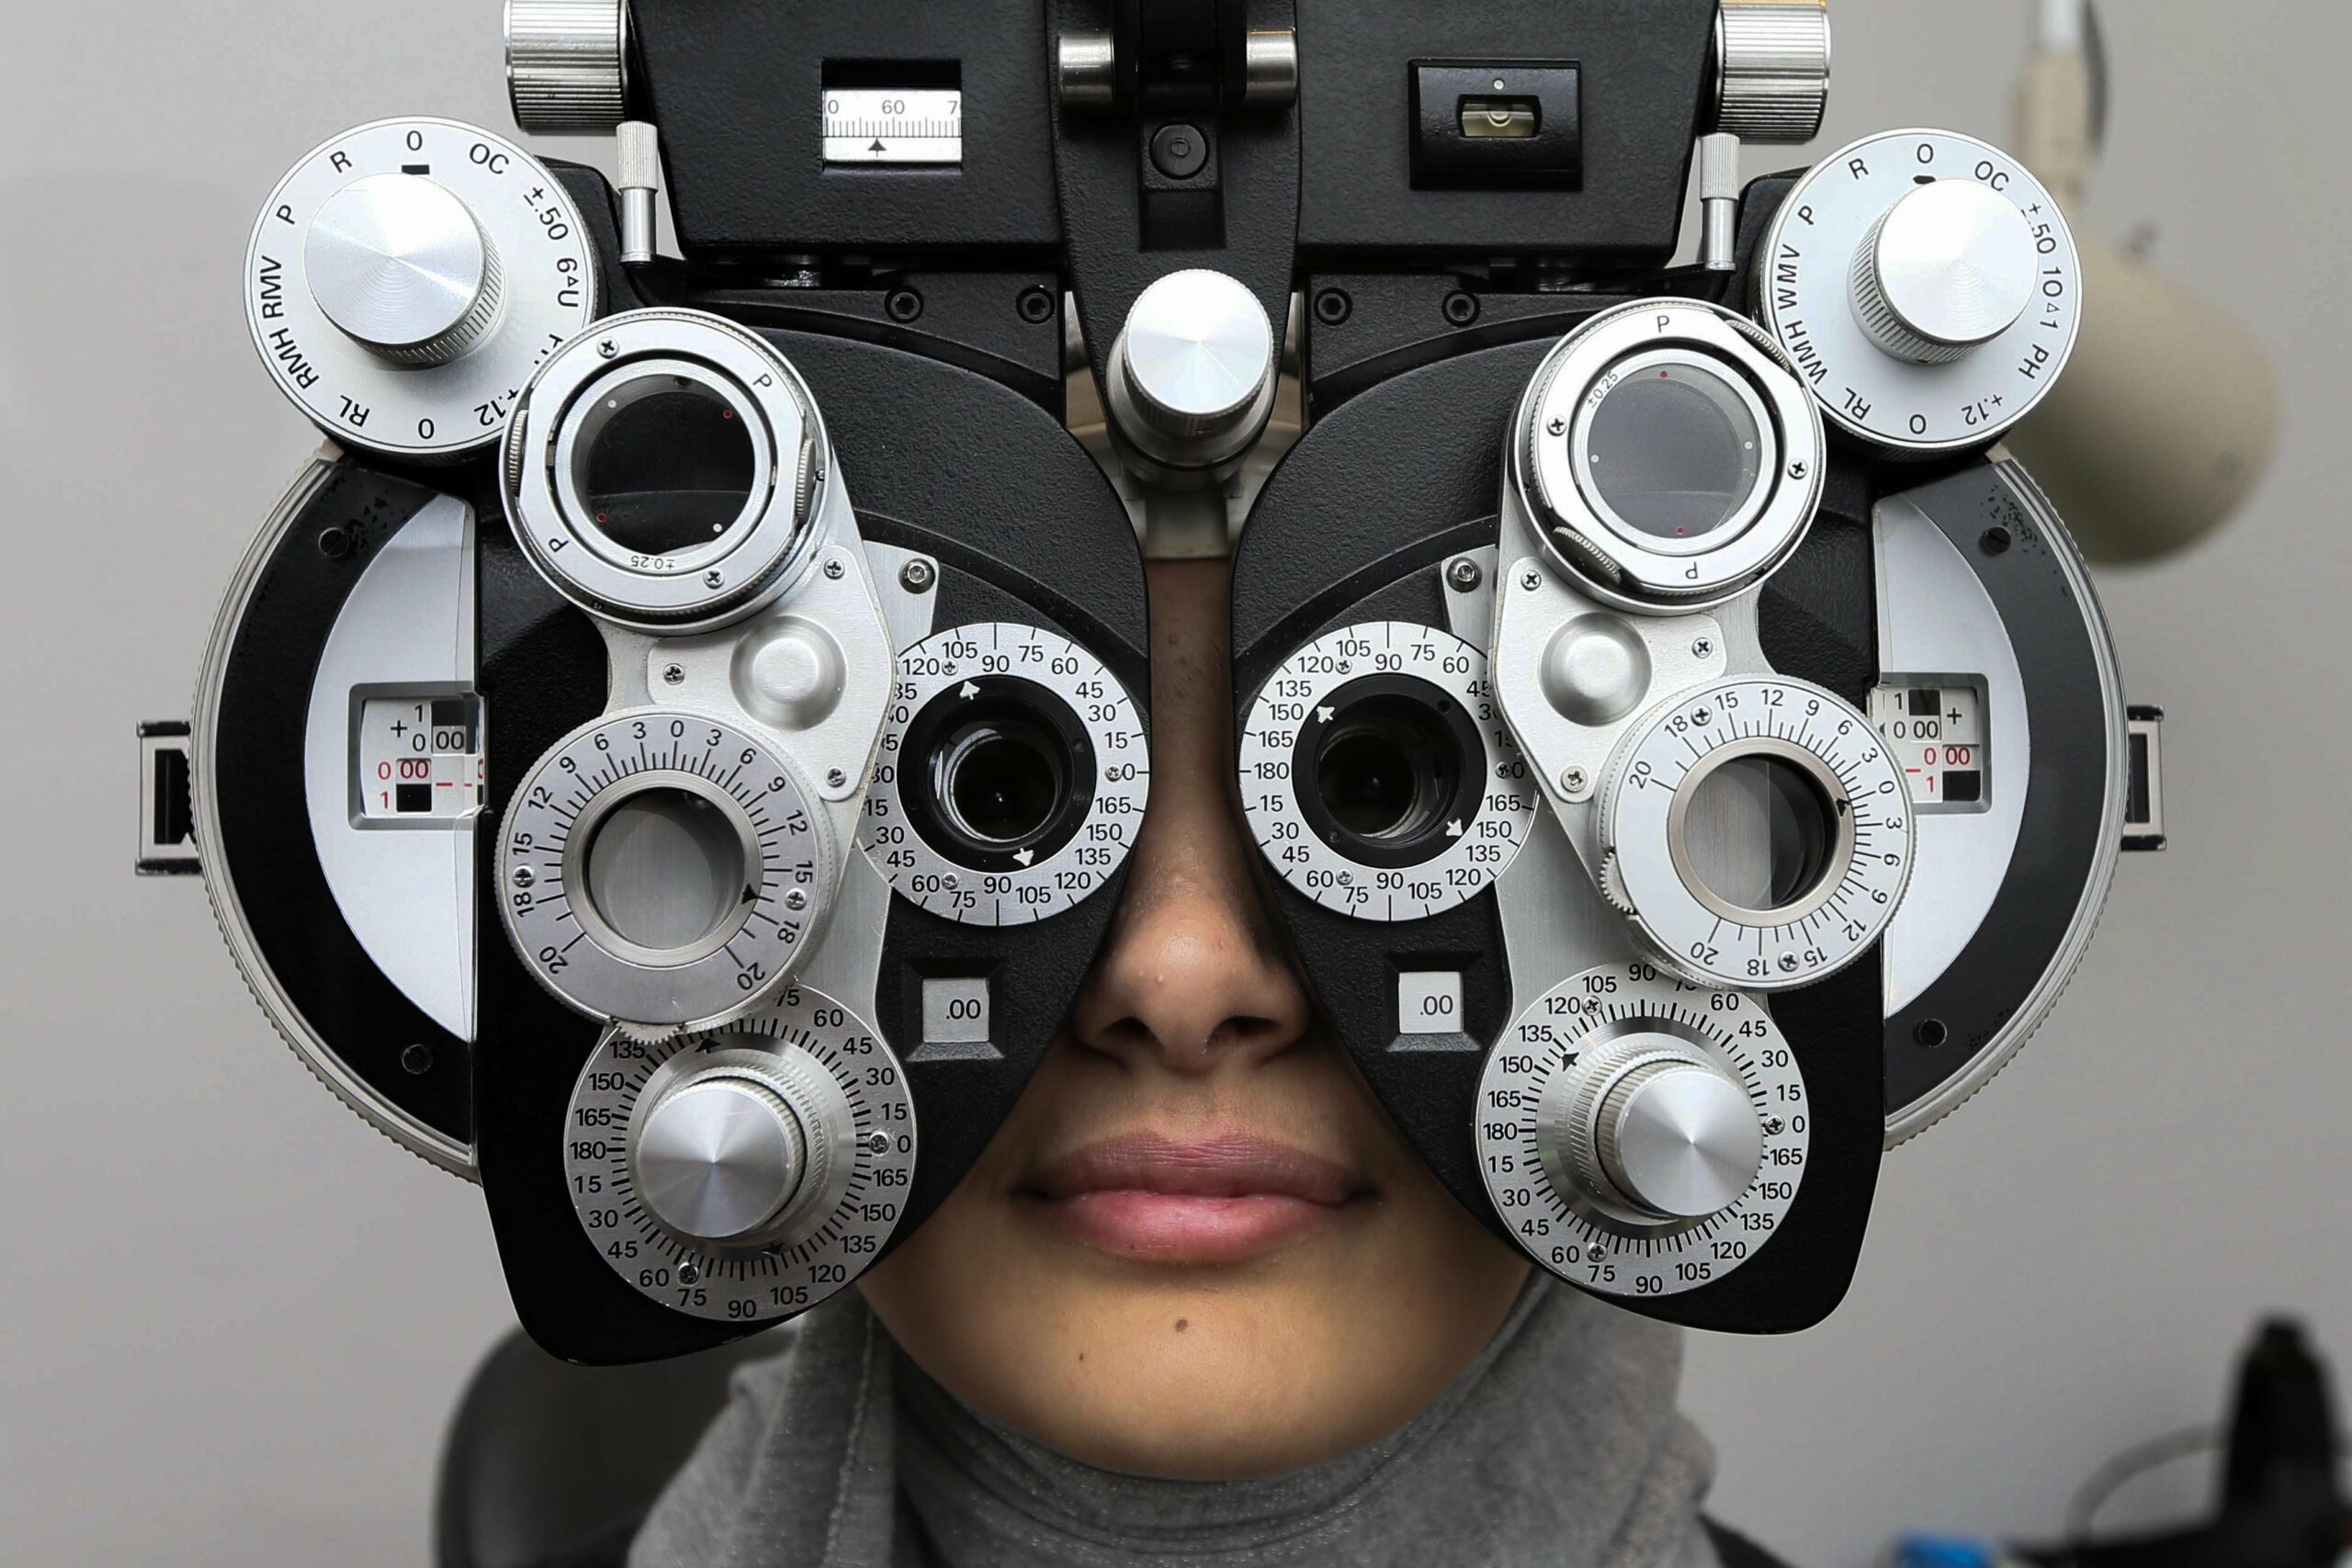 Talks between Ontario's optometrists and government remain stalled